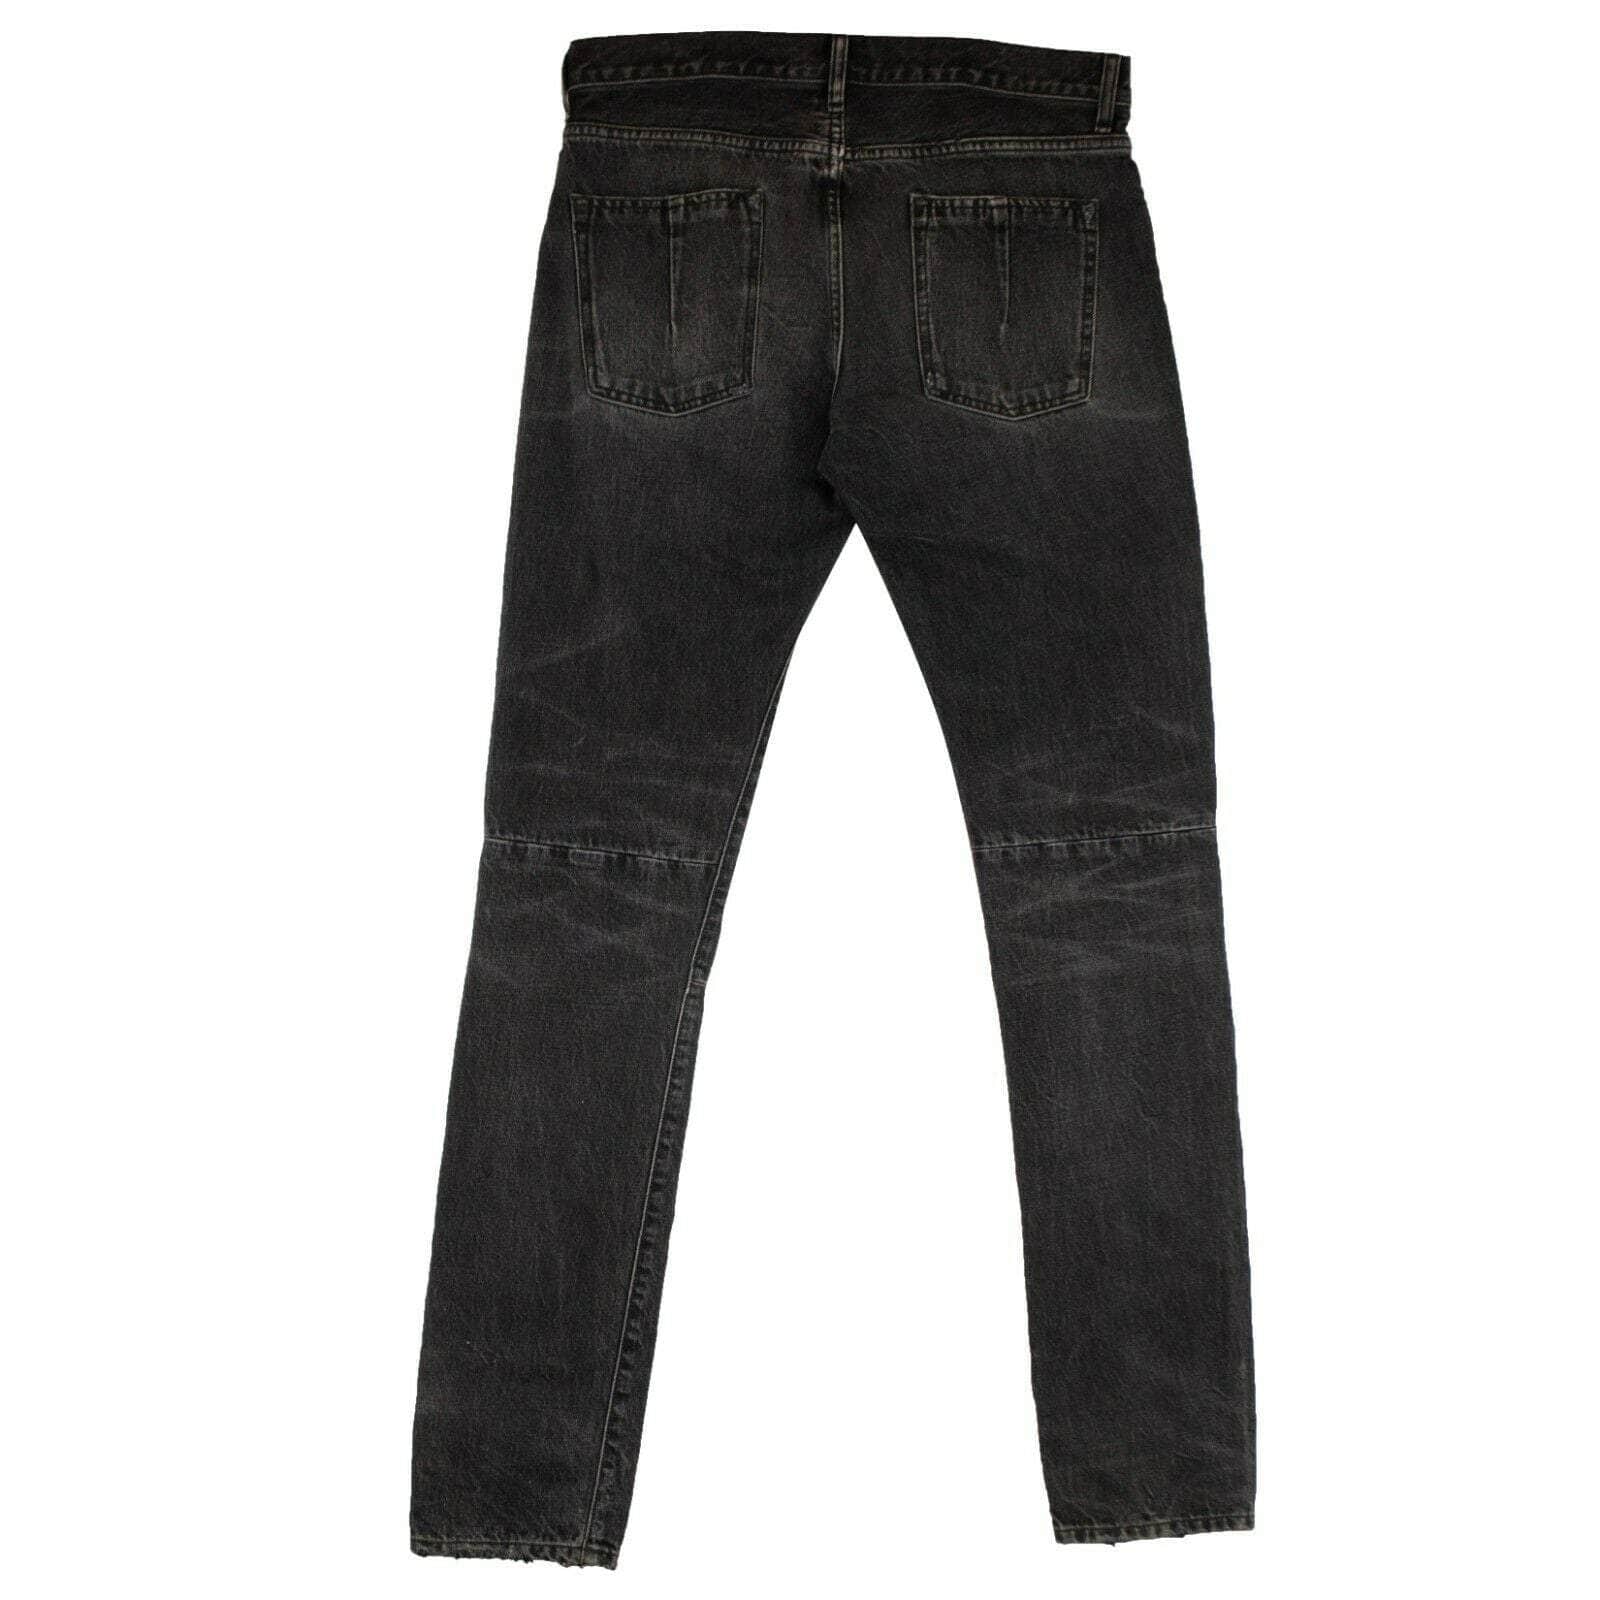 UNRAVEL PROJECT channelenable-all, couponcollection, gender-mens, main-clothing, mens-skinny-jeans, size-30, size-31, size-32, size-36, size-38, under-250, unravel-project Black Mid Rise Skinny Jeans